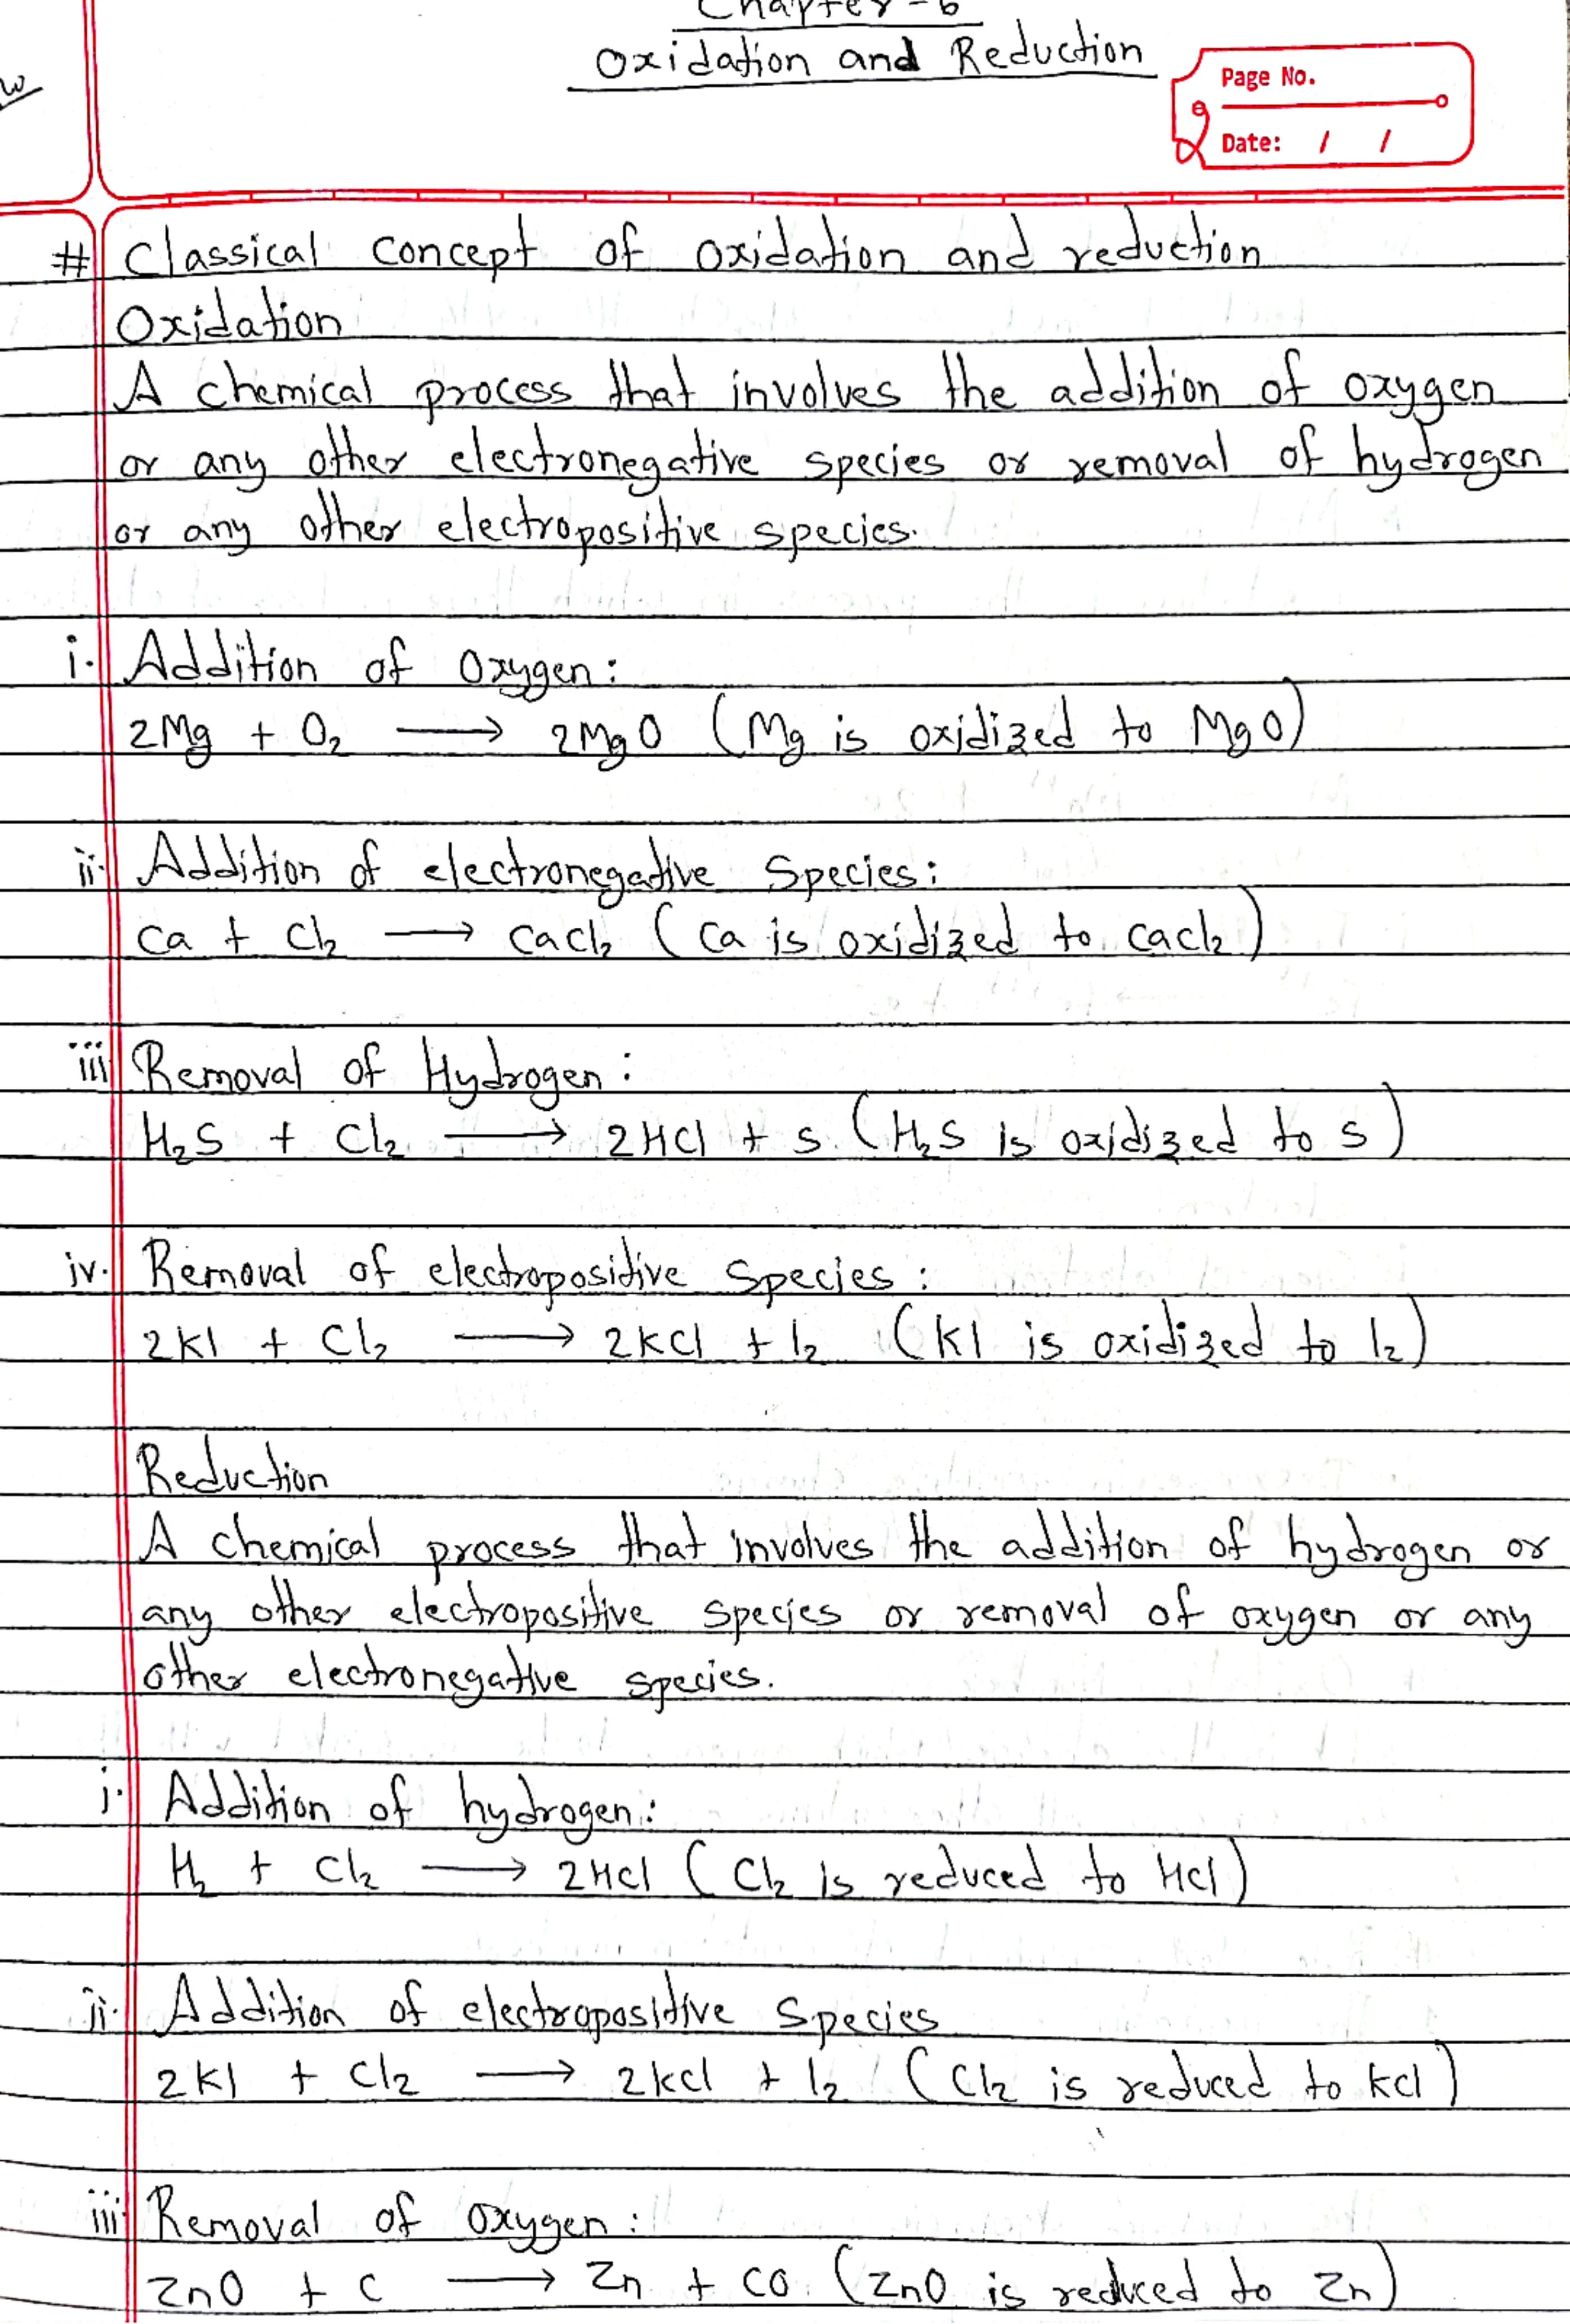 Oxidation and Reduction Class 11 Chemistry Notes